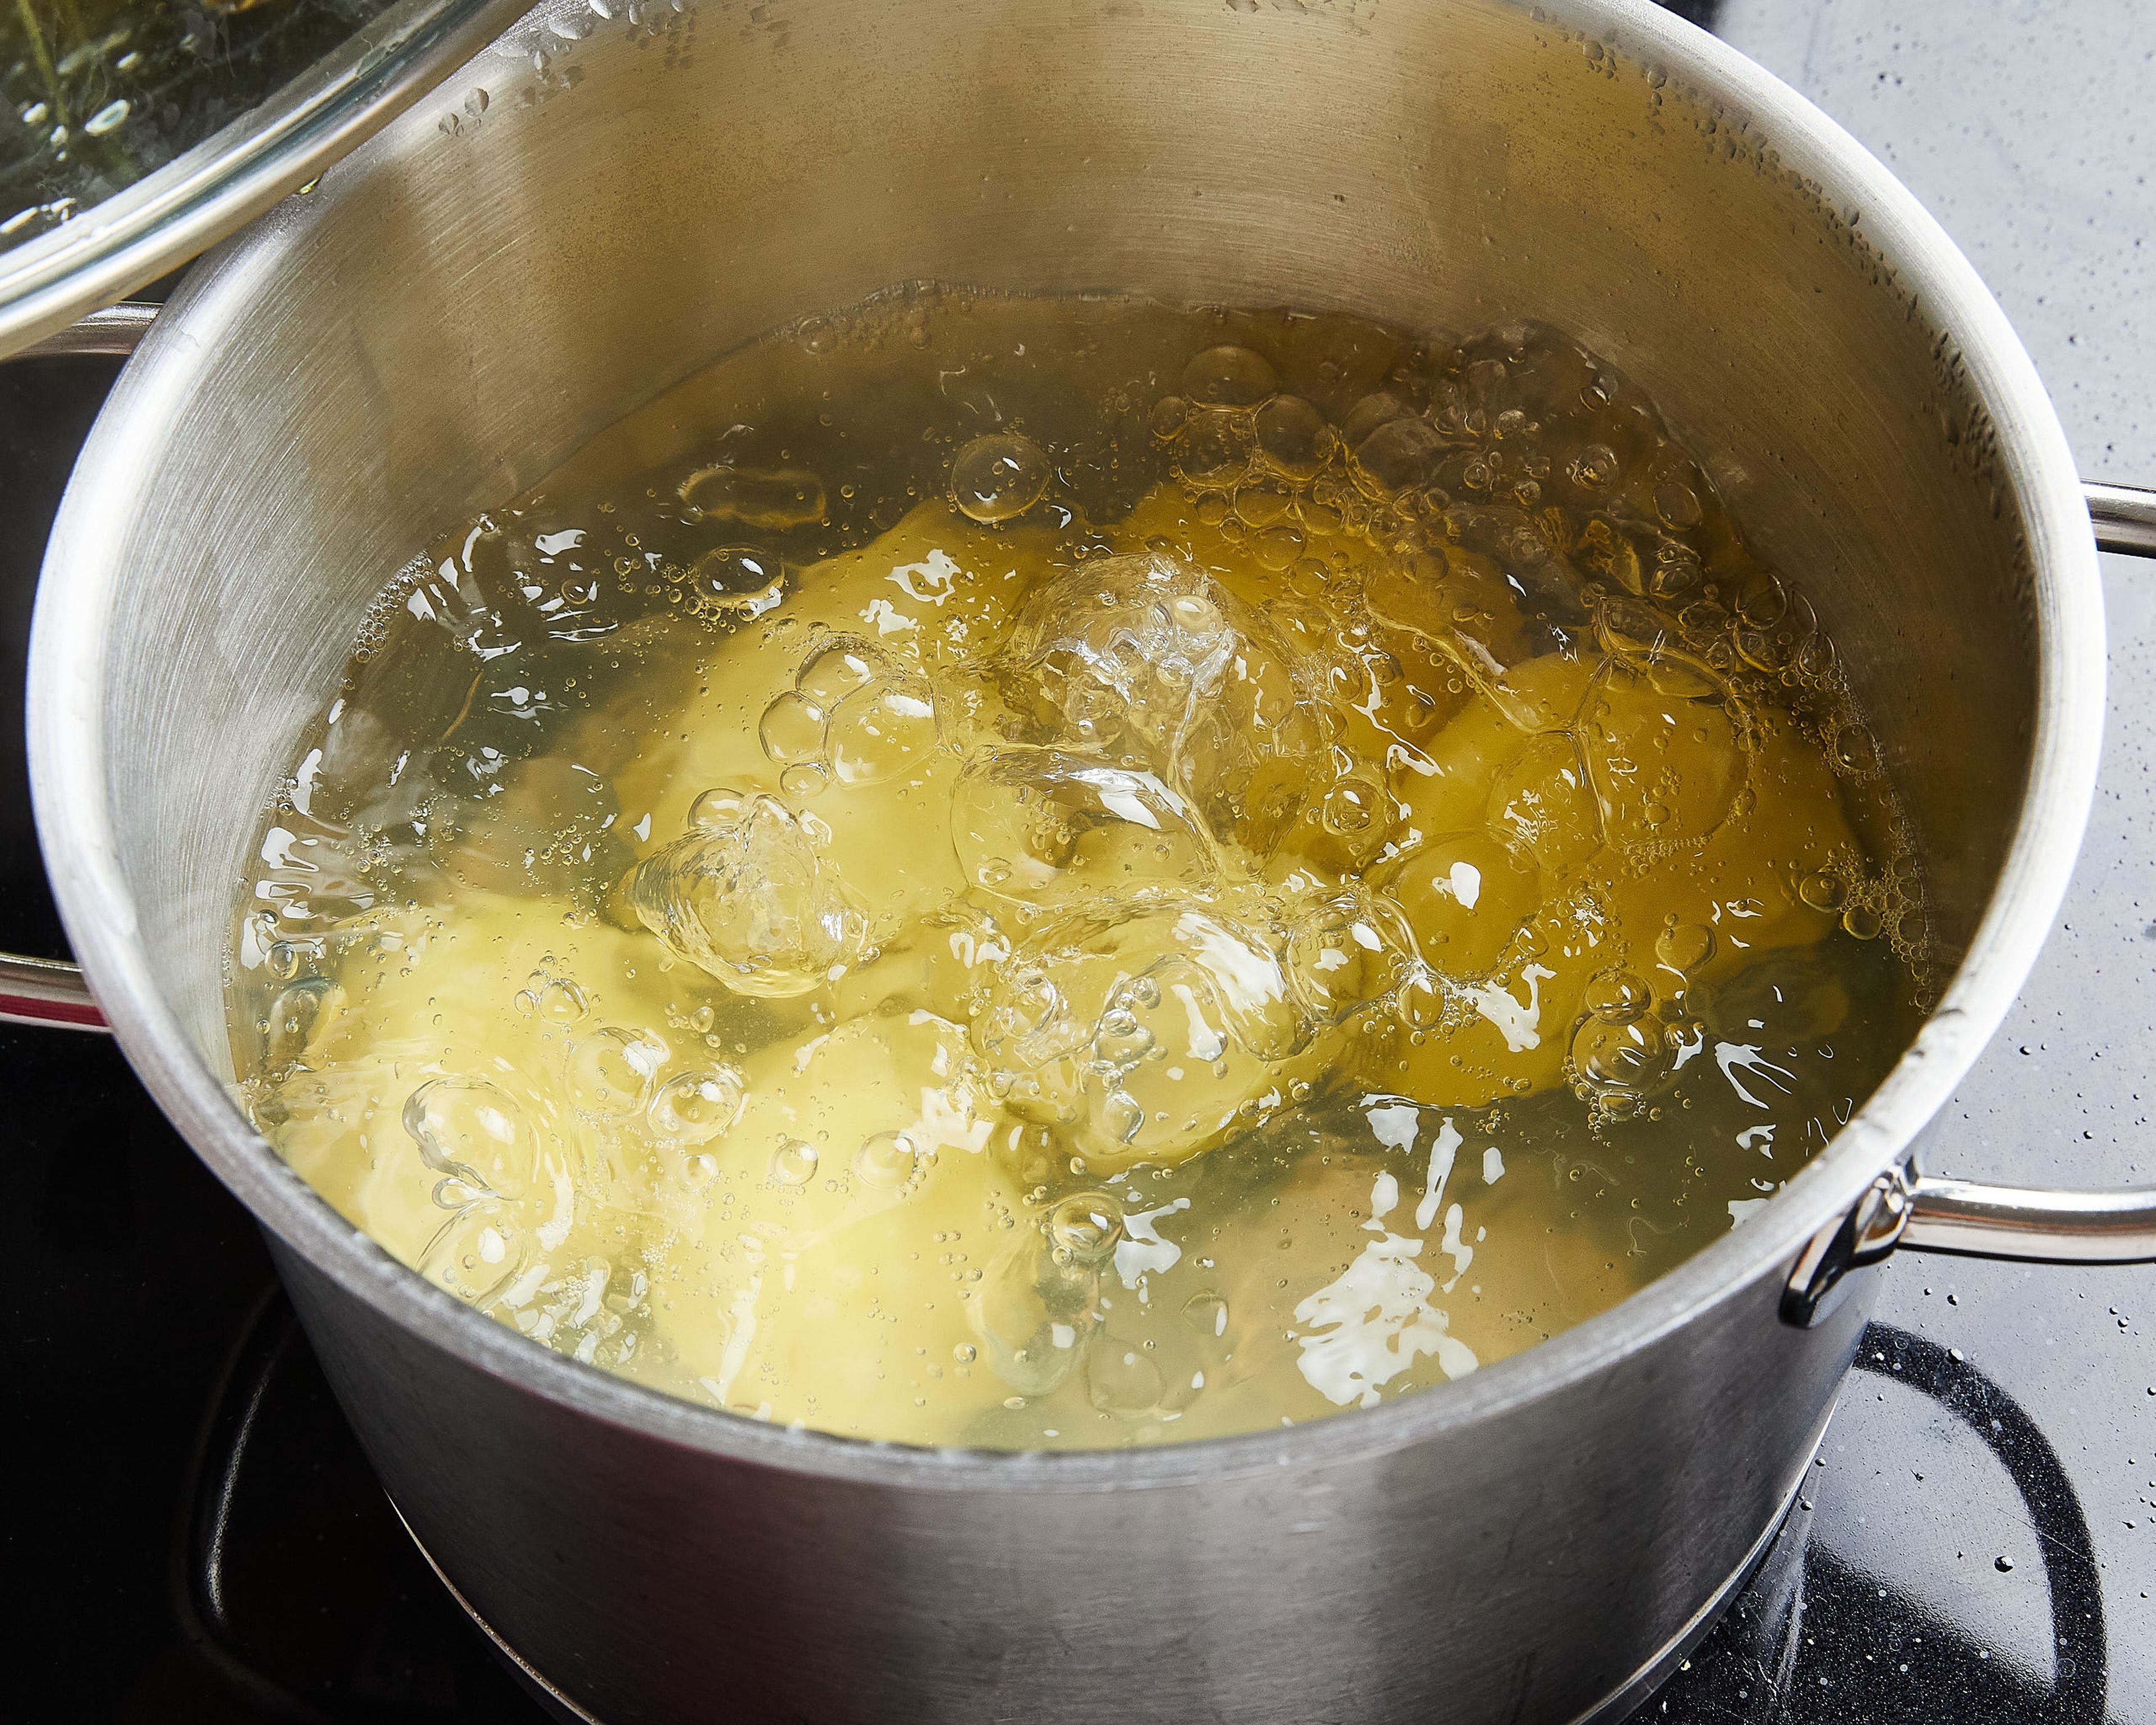 Peel potatoes, cut in half lengthwise and place in a pot. Fill with cold water, bring to the boil unsalted and cook for approx. 15–20 min., depending on size, until tender.